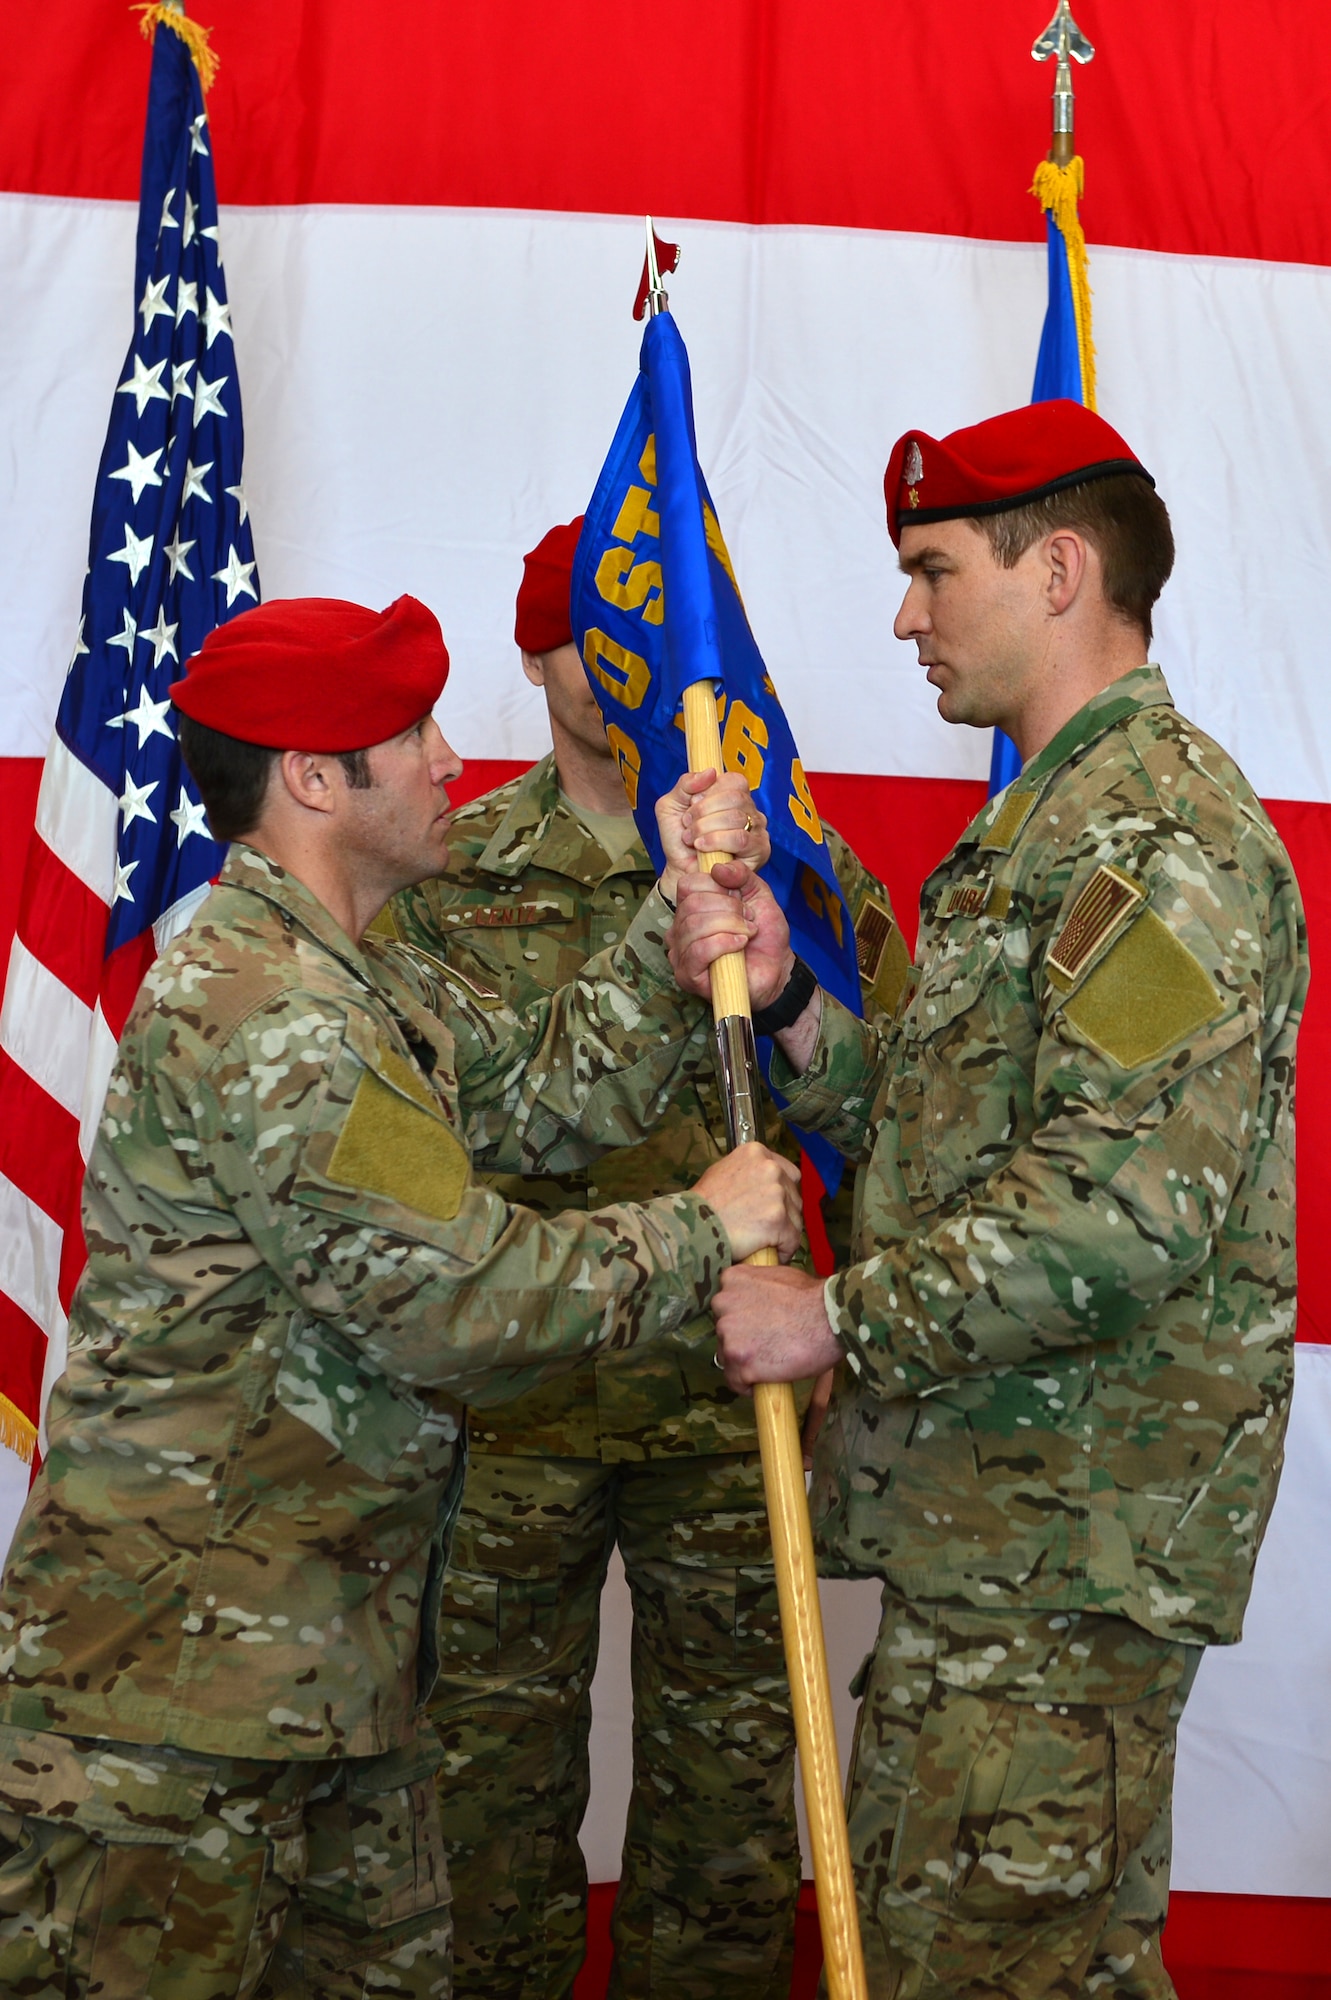 U.S. Air Force Col. Kurt Buller, 720th Special Tactics Group commander, passes the guidon to Maj. Michael Jensen, 26th Special Tactics Squadron commander, during a squadron activation ceremony, April 24, 2014 at Cannon Air Force Base, N.M. The 26 STS, formerly Detachment 1 of the 720th Special Tactics Group, Hurlburt Field, Fla., is a newly activated squadron based at Cannon. (U.S. Air Force photo/ Senior Airman Eboni Reece)